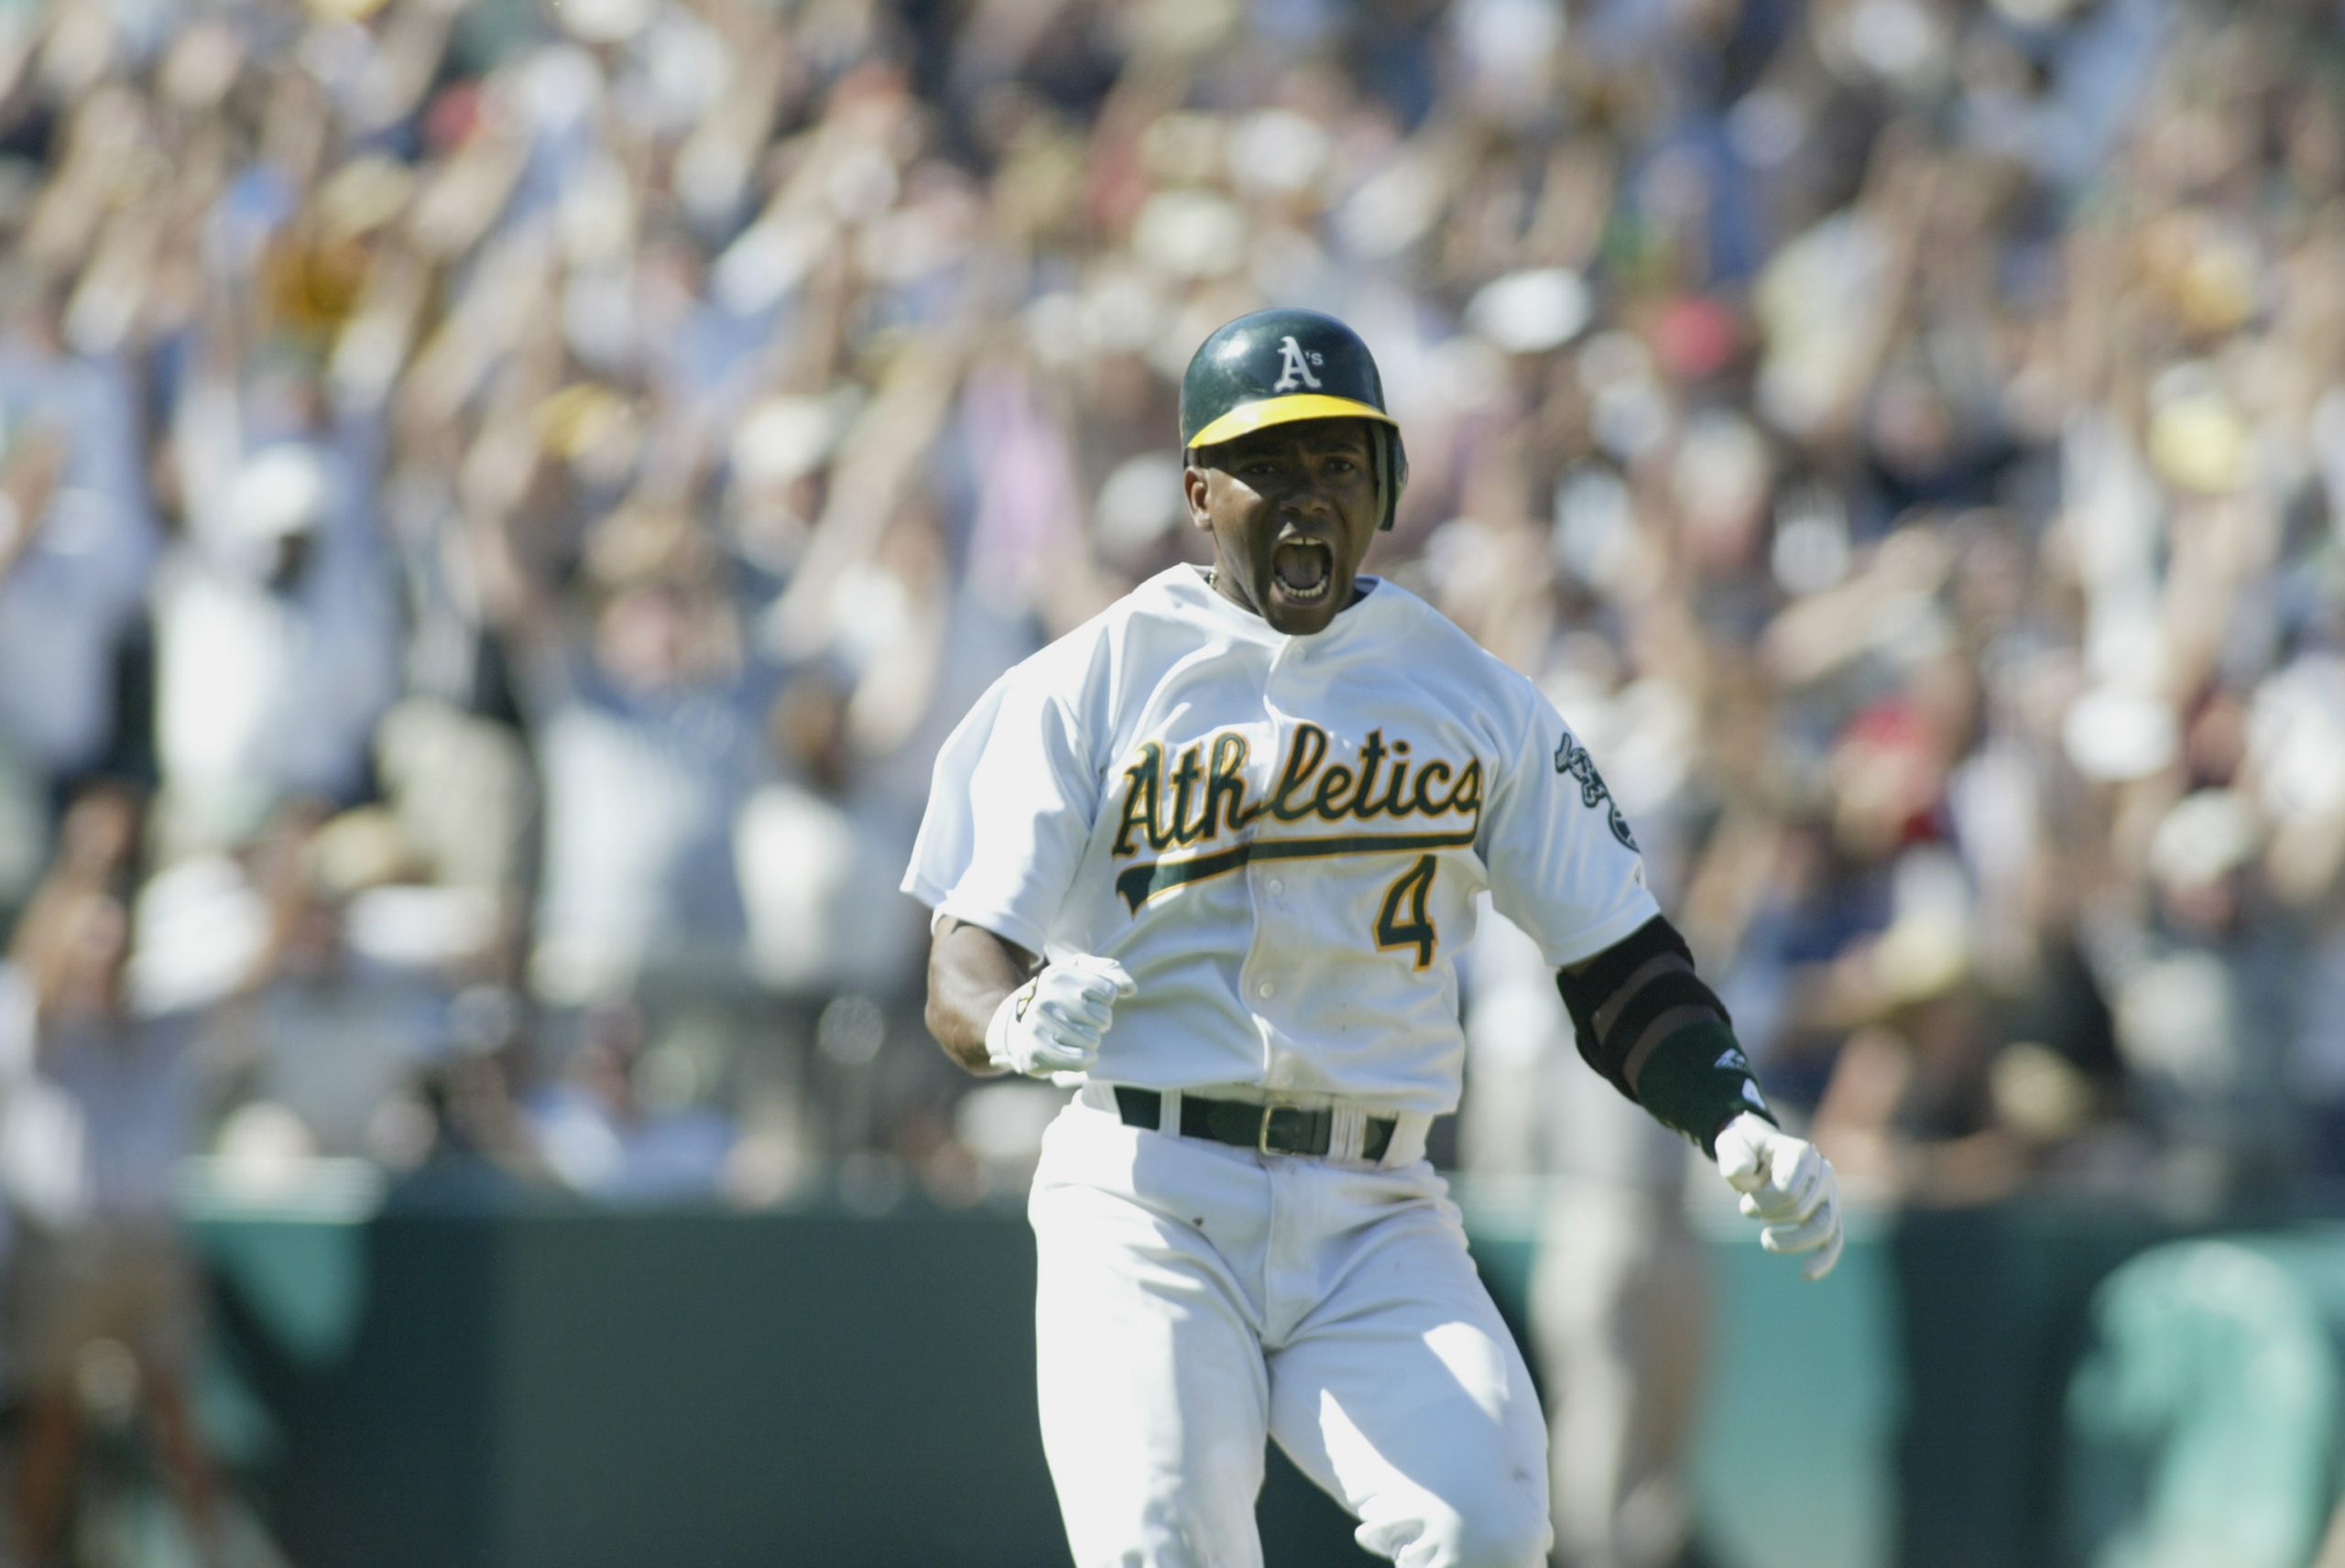 OAKLAND, CA - SEPTEMBER 2: Miguel Tejada #4 of the Oakland A's celebrates hitting a game winning si...